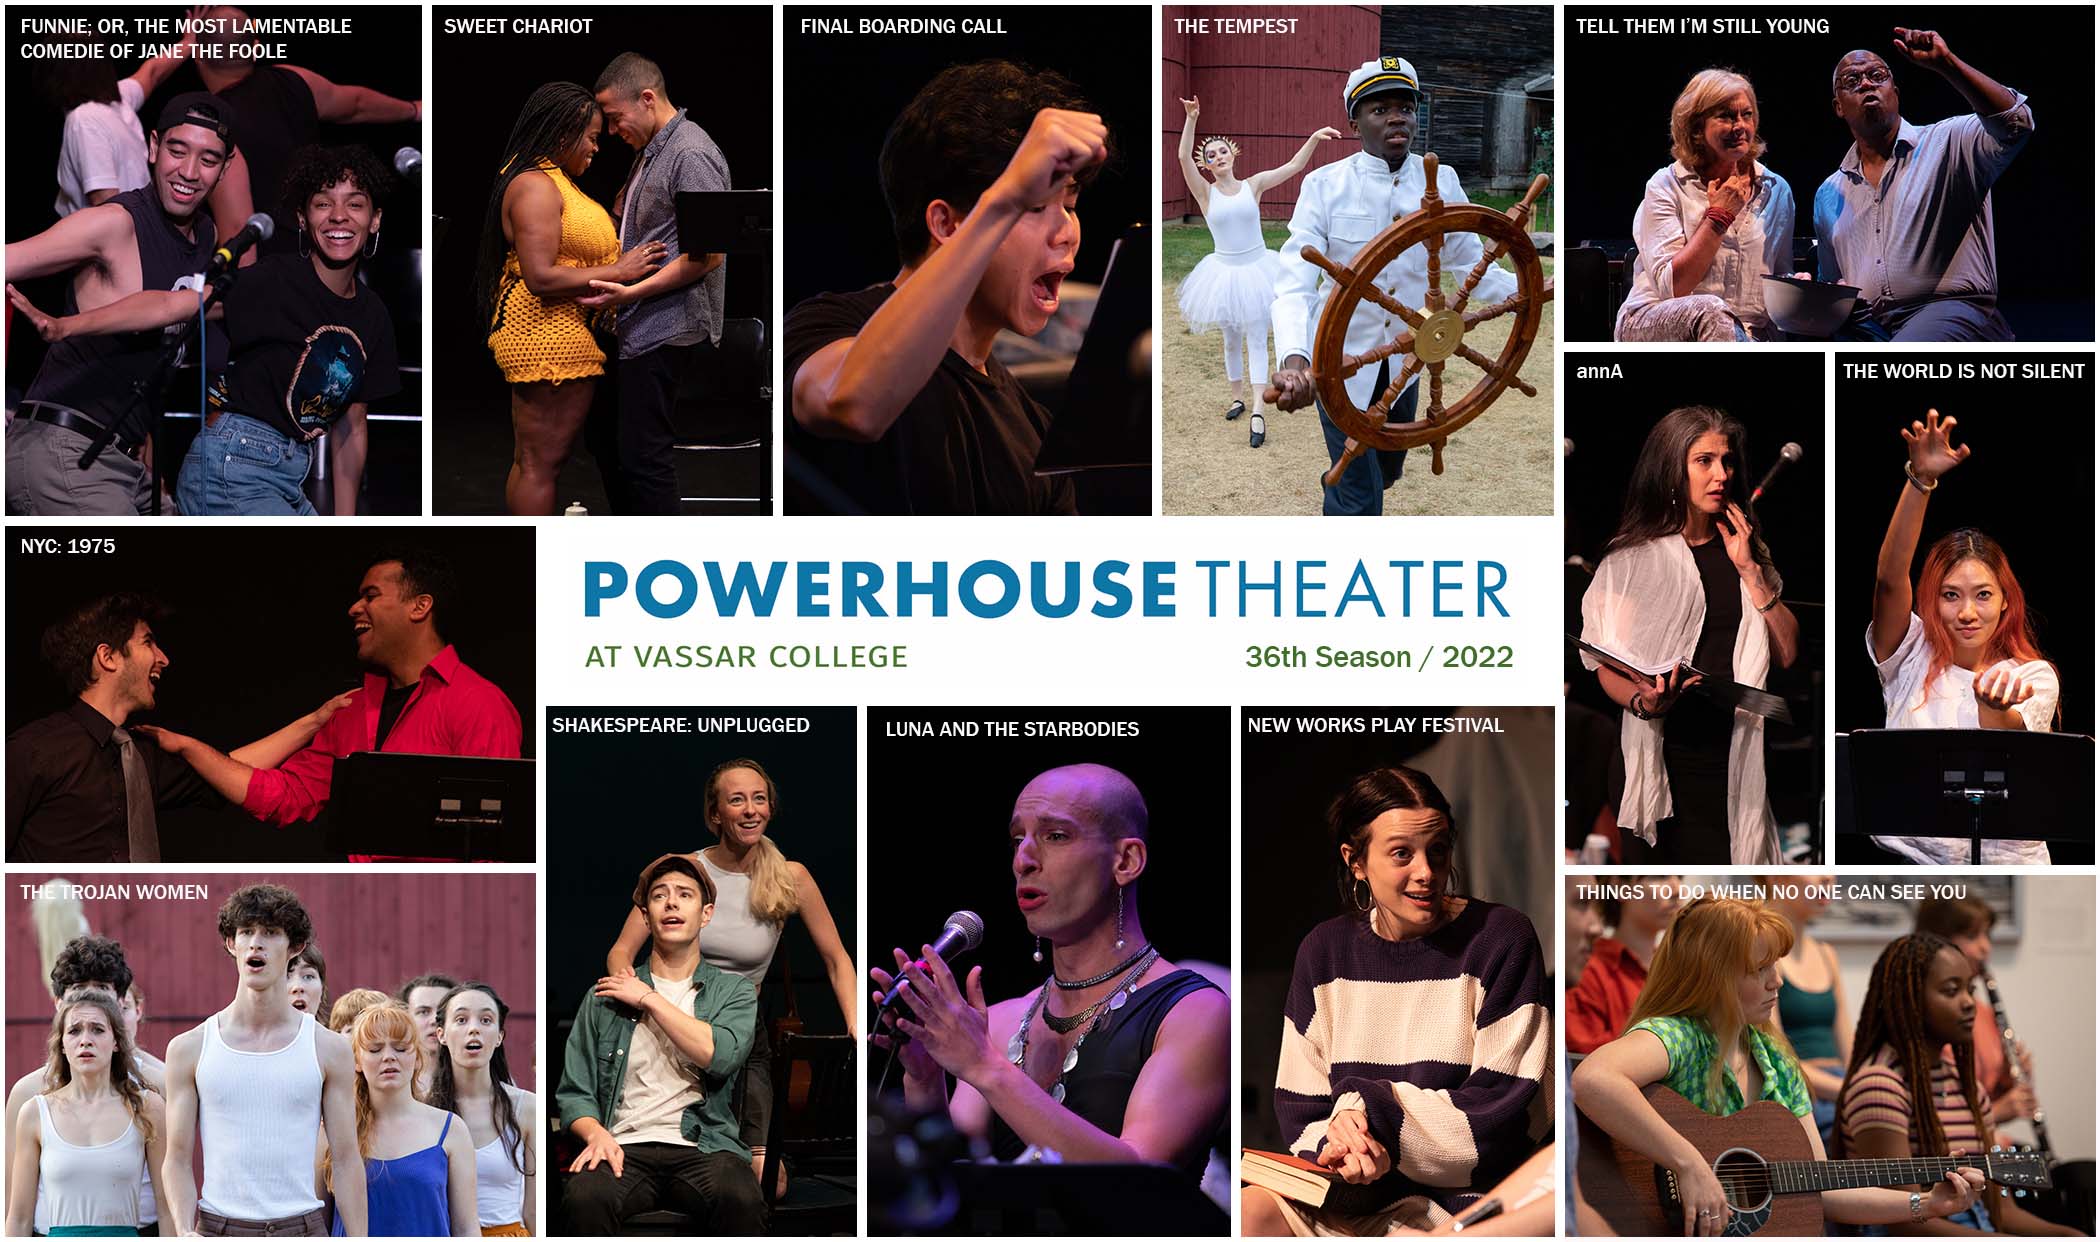 Collage of Powerhouse Theater 2022 season production images with text overlays. Text starting in top row left to right: Funnie; or the Most Lamentable Comedie of Jane the Foole; Sweet Chariot; Final Boarding Call; The Tempest; Tell Them I'm Still Young. Middle row: NYC :1975; Powerhouse Theater at Vassar College 36th Season / 2022; annA; The World is Not Silent. Bottom row: The Trojan Women; Shakespeare: unplugged; Luna and the Starbodies; New Works Play Festival; Things To Do When No One Can See You.